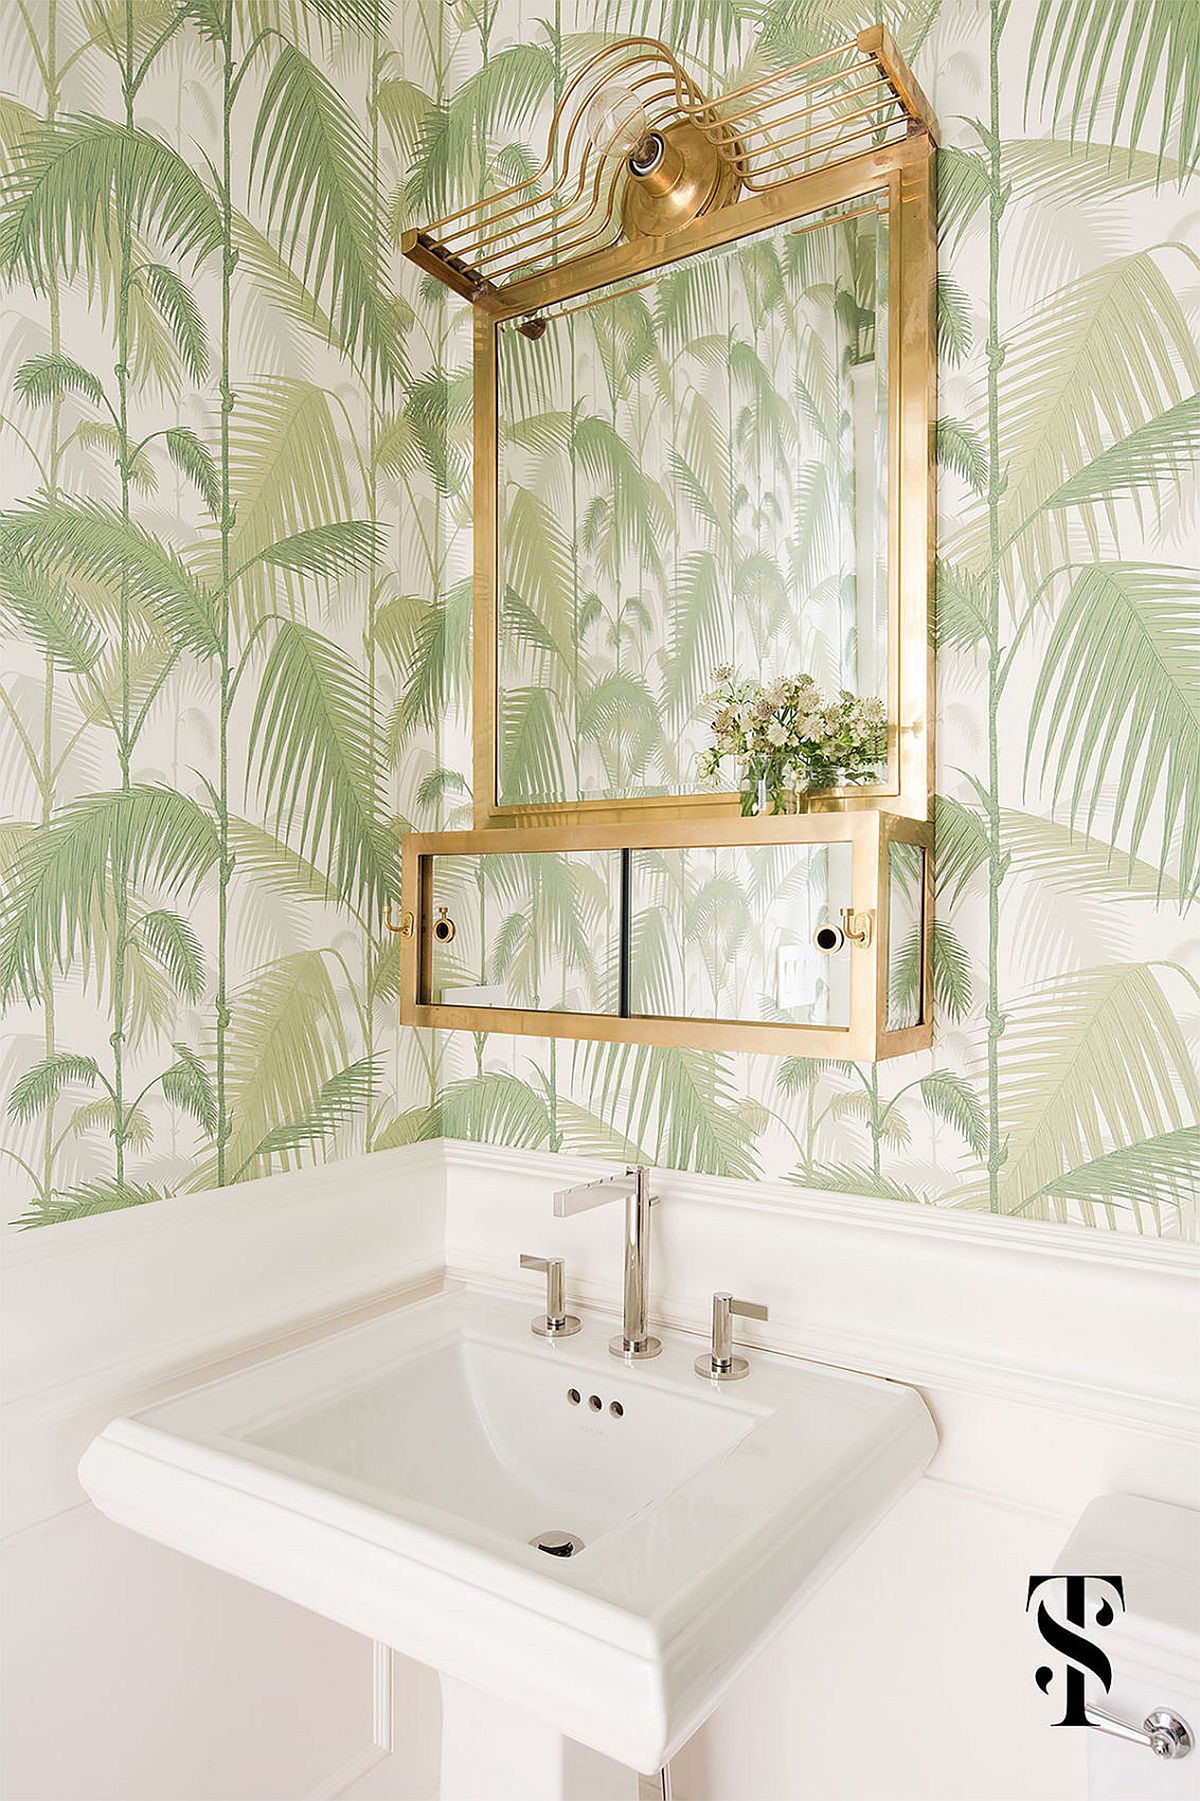 Tropical style powder room idea with hot metallic accents